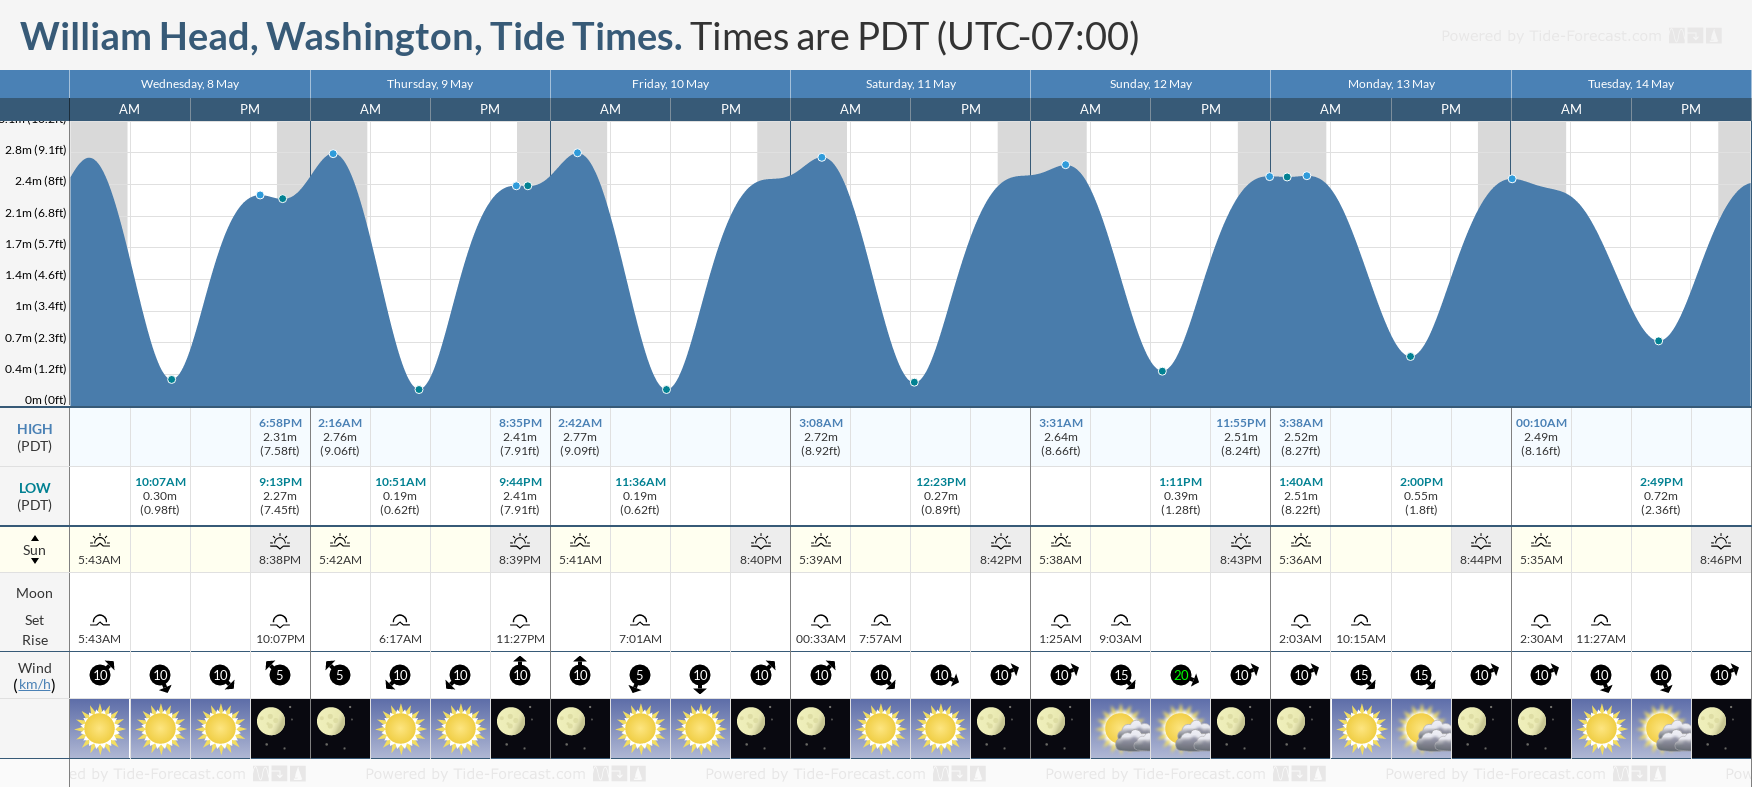 William Head, Washington Tide Chart including high and low tide tide times for the next 7 days